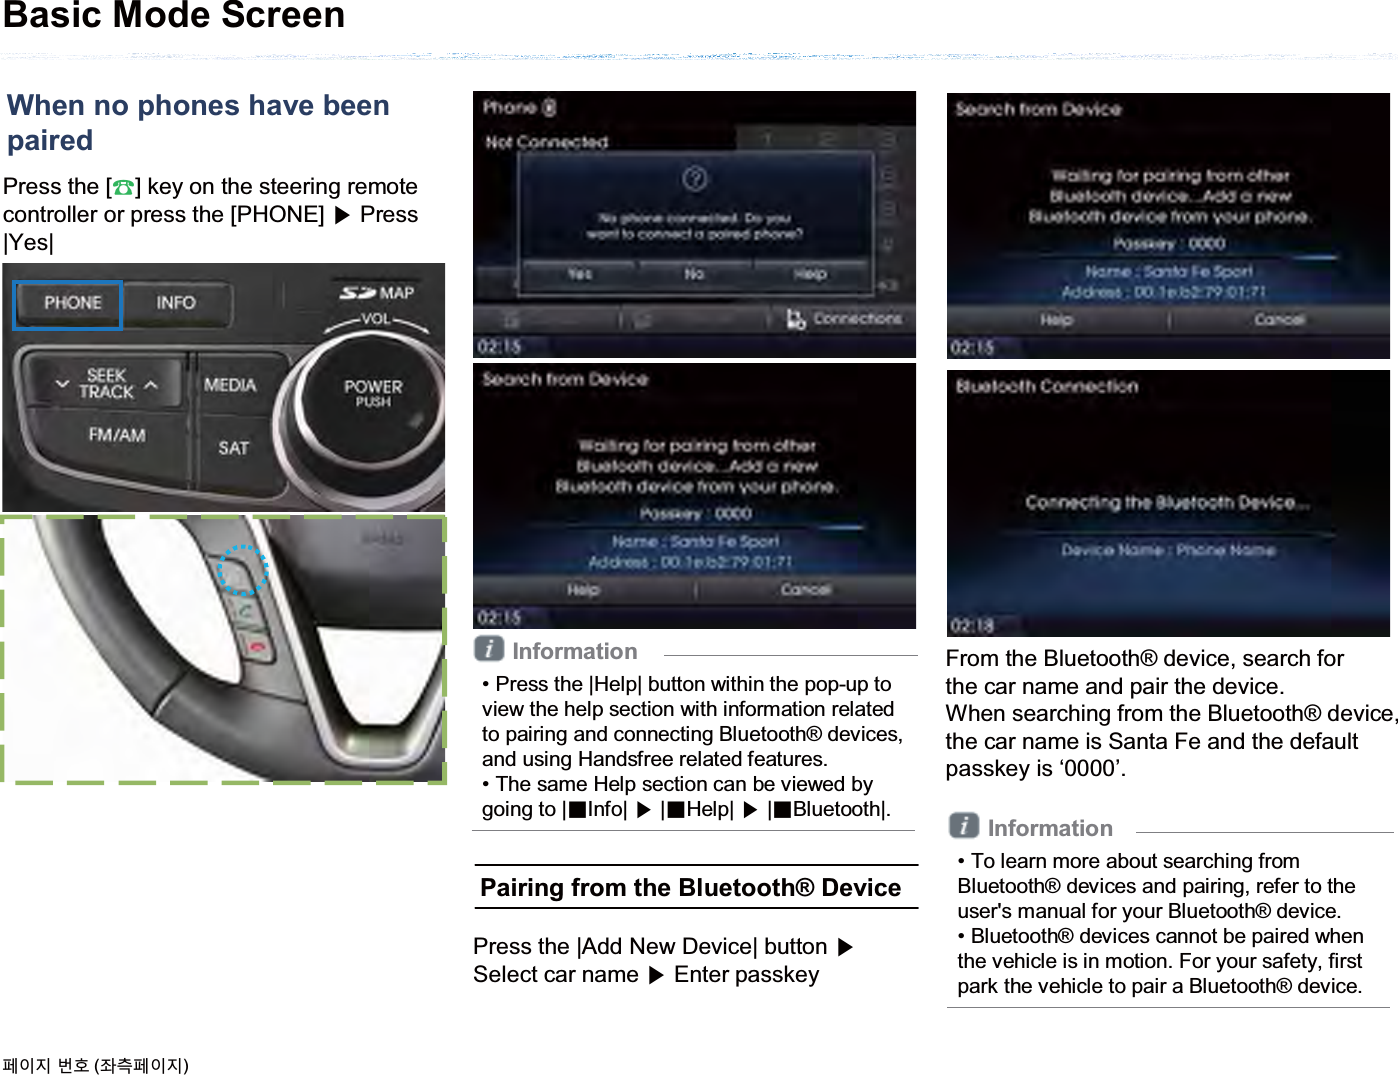 Press the [೨] key on the steering remote controller or press the [PHONE] ೛Press |Yes|Basic Mode ScreenInformation• Press the |Help| button within the pop-up to view the help section with information related to pairing and connecting Bluetooth® devices, and using Handsfree related features.• The same Help section can be viewed by going to |ȿInfo| ೛|ȿHelp| ೛|ȿBluetooth|.When no phones have beenpaired૓ࢇए ء୎ (্ࣛ૓ࢇए)Pairing from the Bluetooth® DevicePress the |Add New Device| button ೛Select car name ೛Enter passkeyFrom the Bluetooth® device, search forthe car name and pair the device.When searching from the Bluetooth® device,the car name is Santa Fe and the default passkey is ‘0000’.Information• To learn more about searching from Bluetooth® devices and pairing, refer to the user&apos;s manual for your Bluetooth® device.• Bluetooth® devices cannot be paired when the vehicle is in motion. For your safety, first park the vehicle to pair a Bluetooth® device.